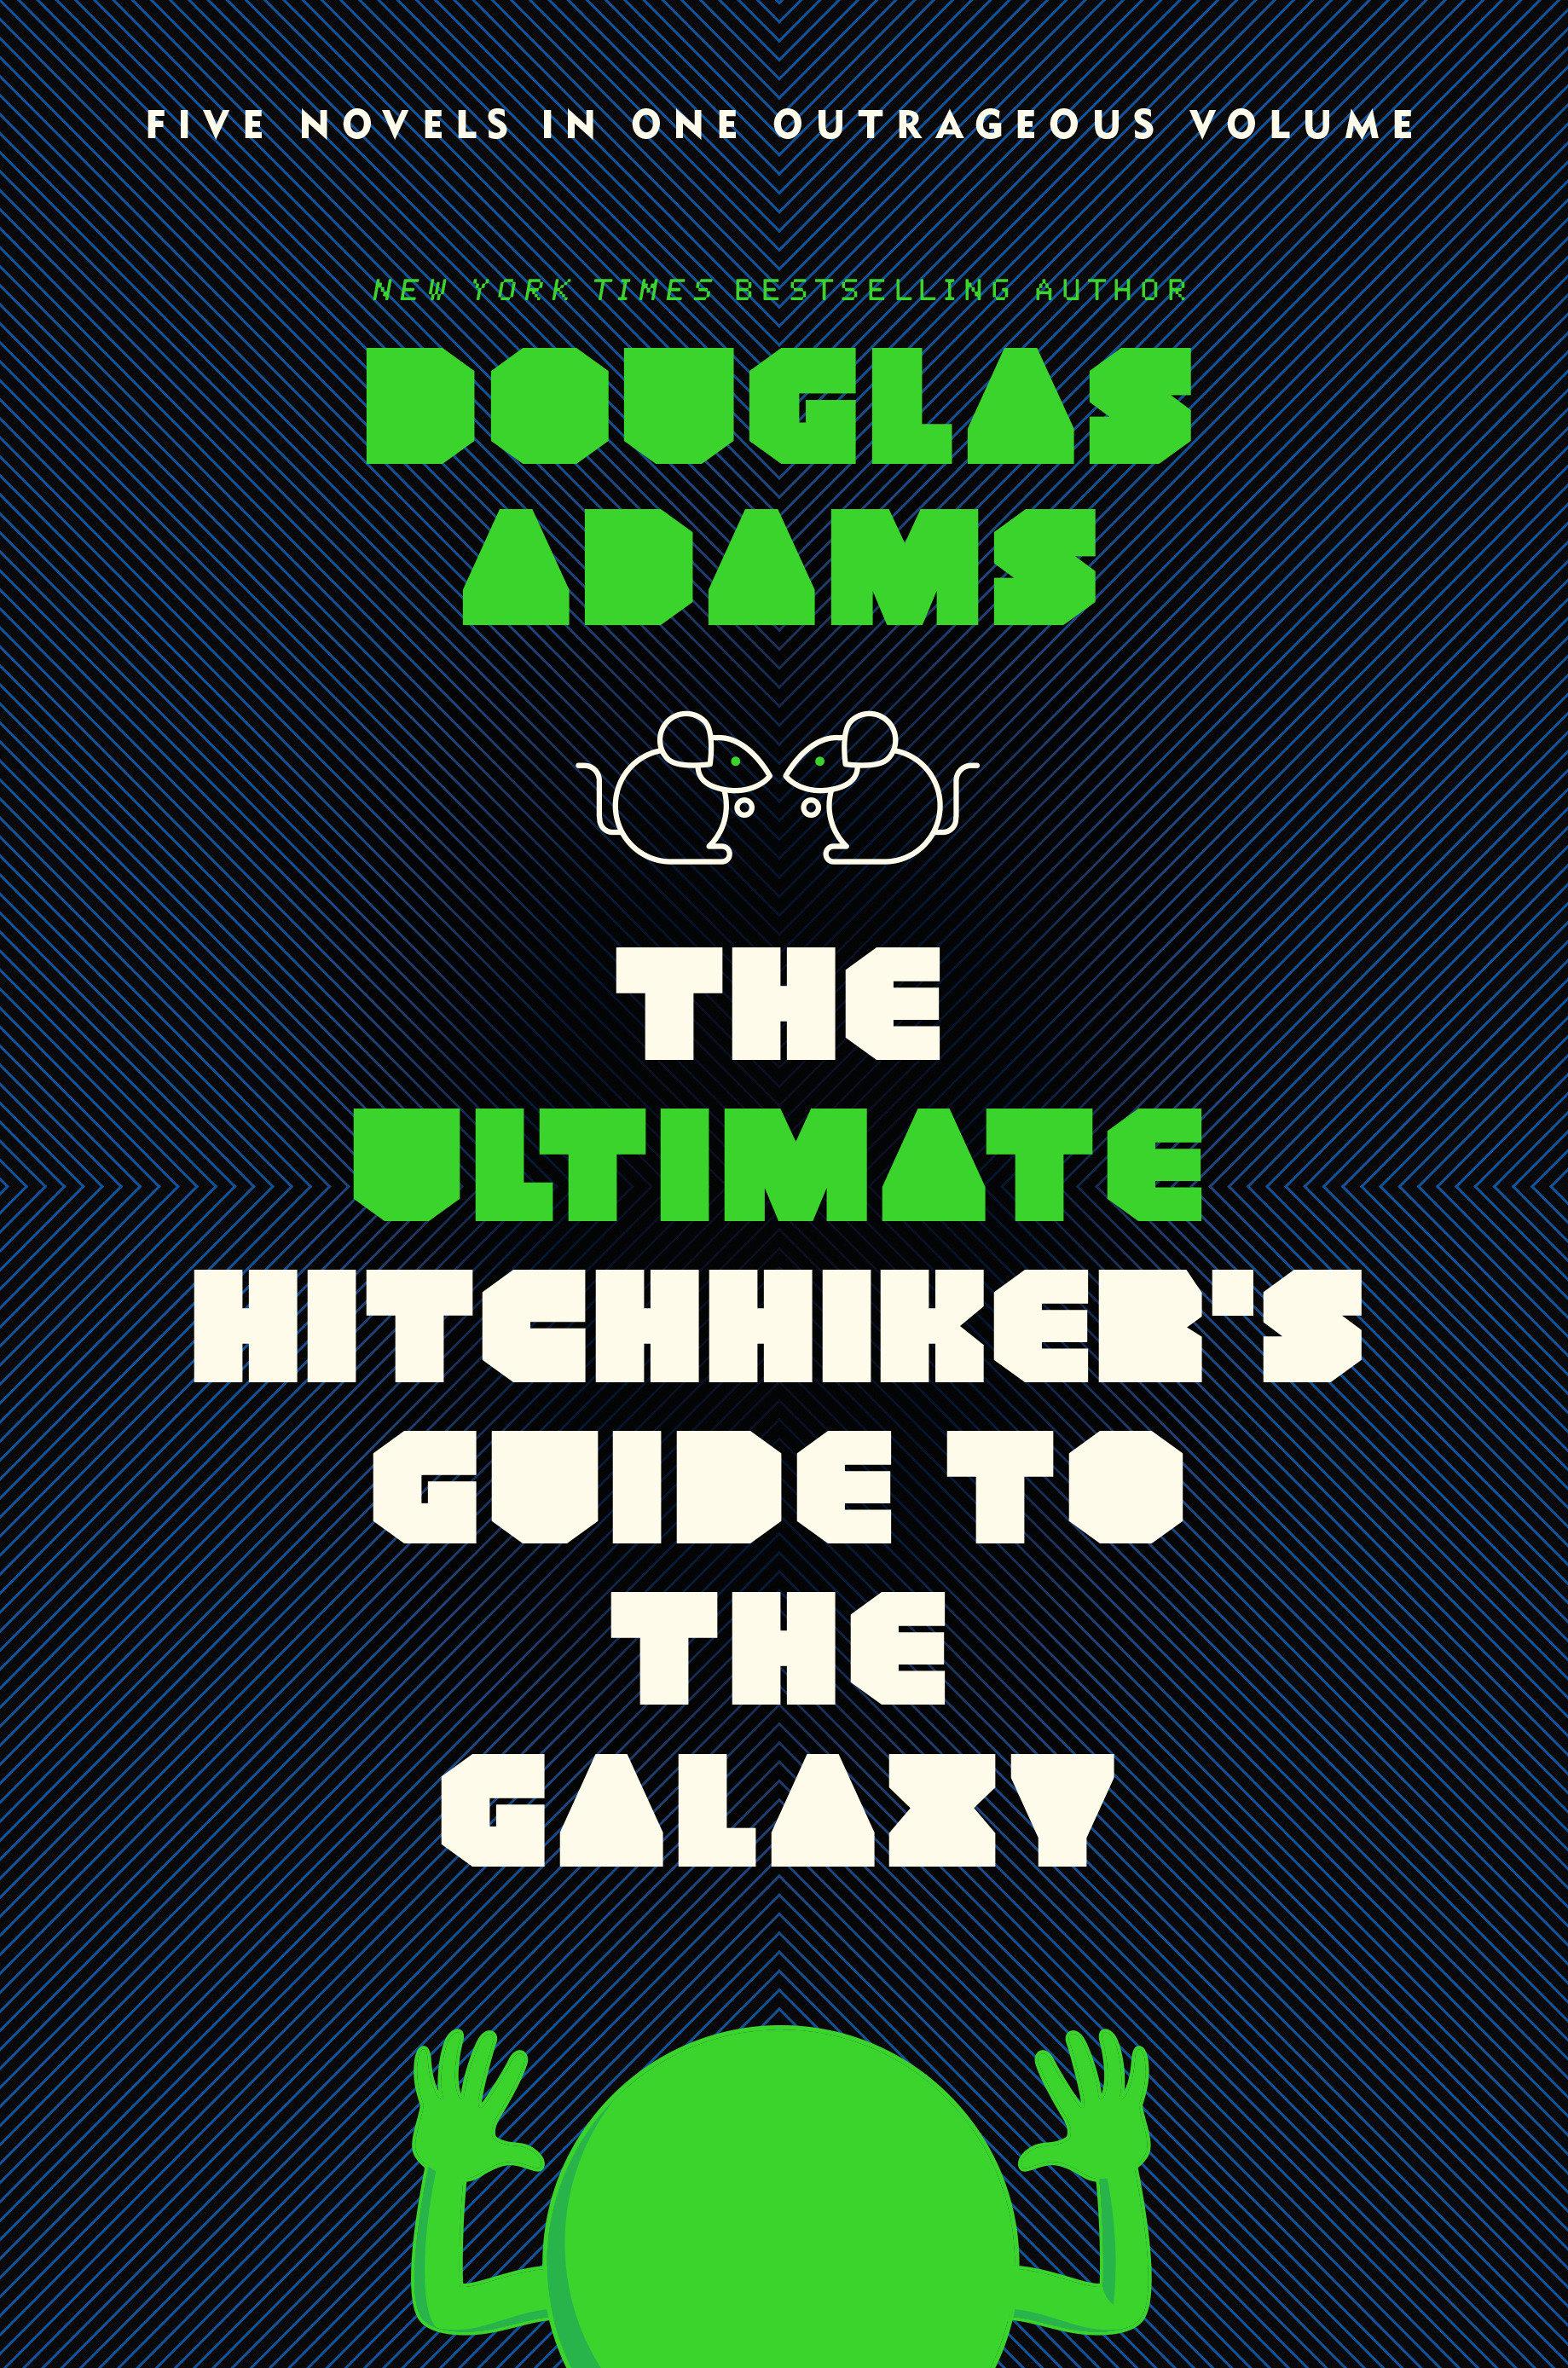 The Ultimate Hitchhiker's Guide to the Galaxy | Five Novels in One Outrageous Volume | Douglas Adams | Taschenbuch | 815 S. | Englisch | 2009 | Random House LLC US | EAN 9780345453747 - Adams, Douglas